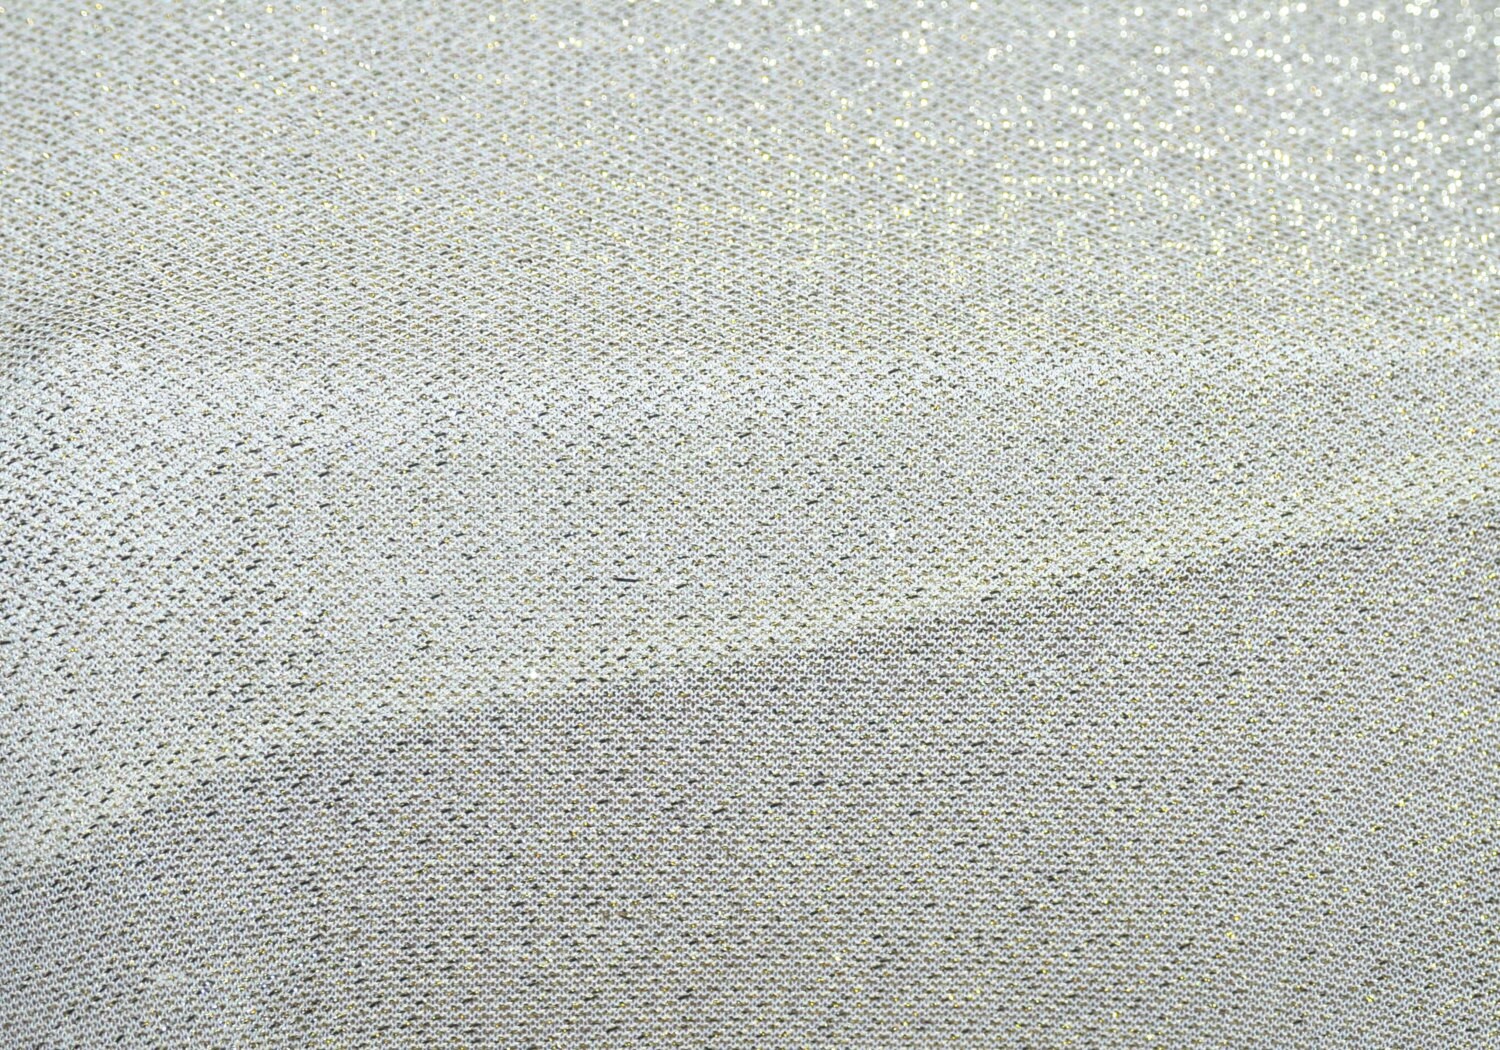 Metallic American Knit Fabric Ivory/Gold stretch by missnancy48